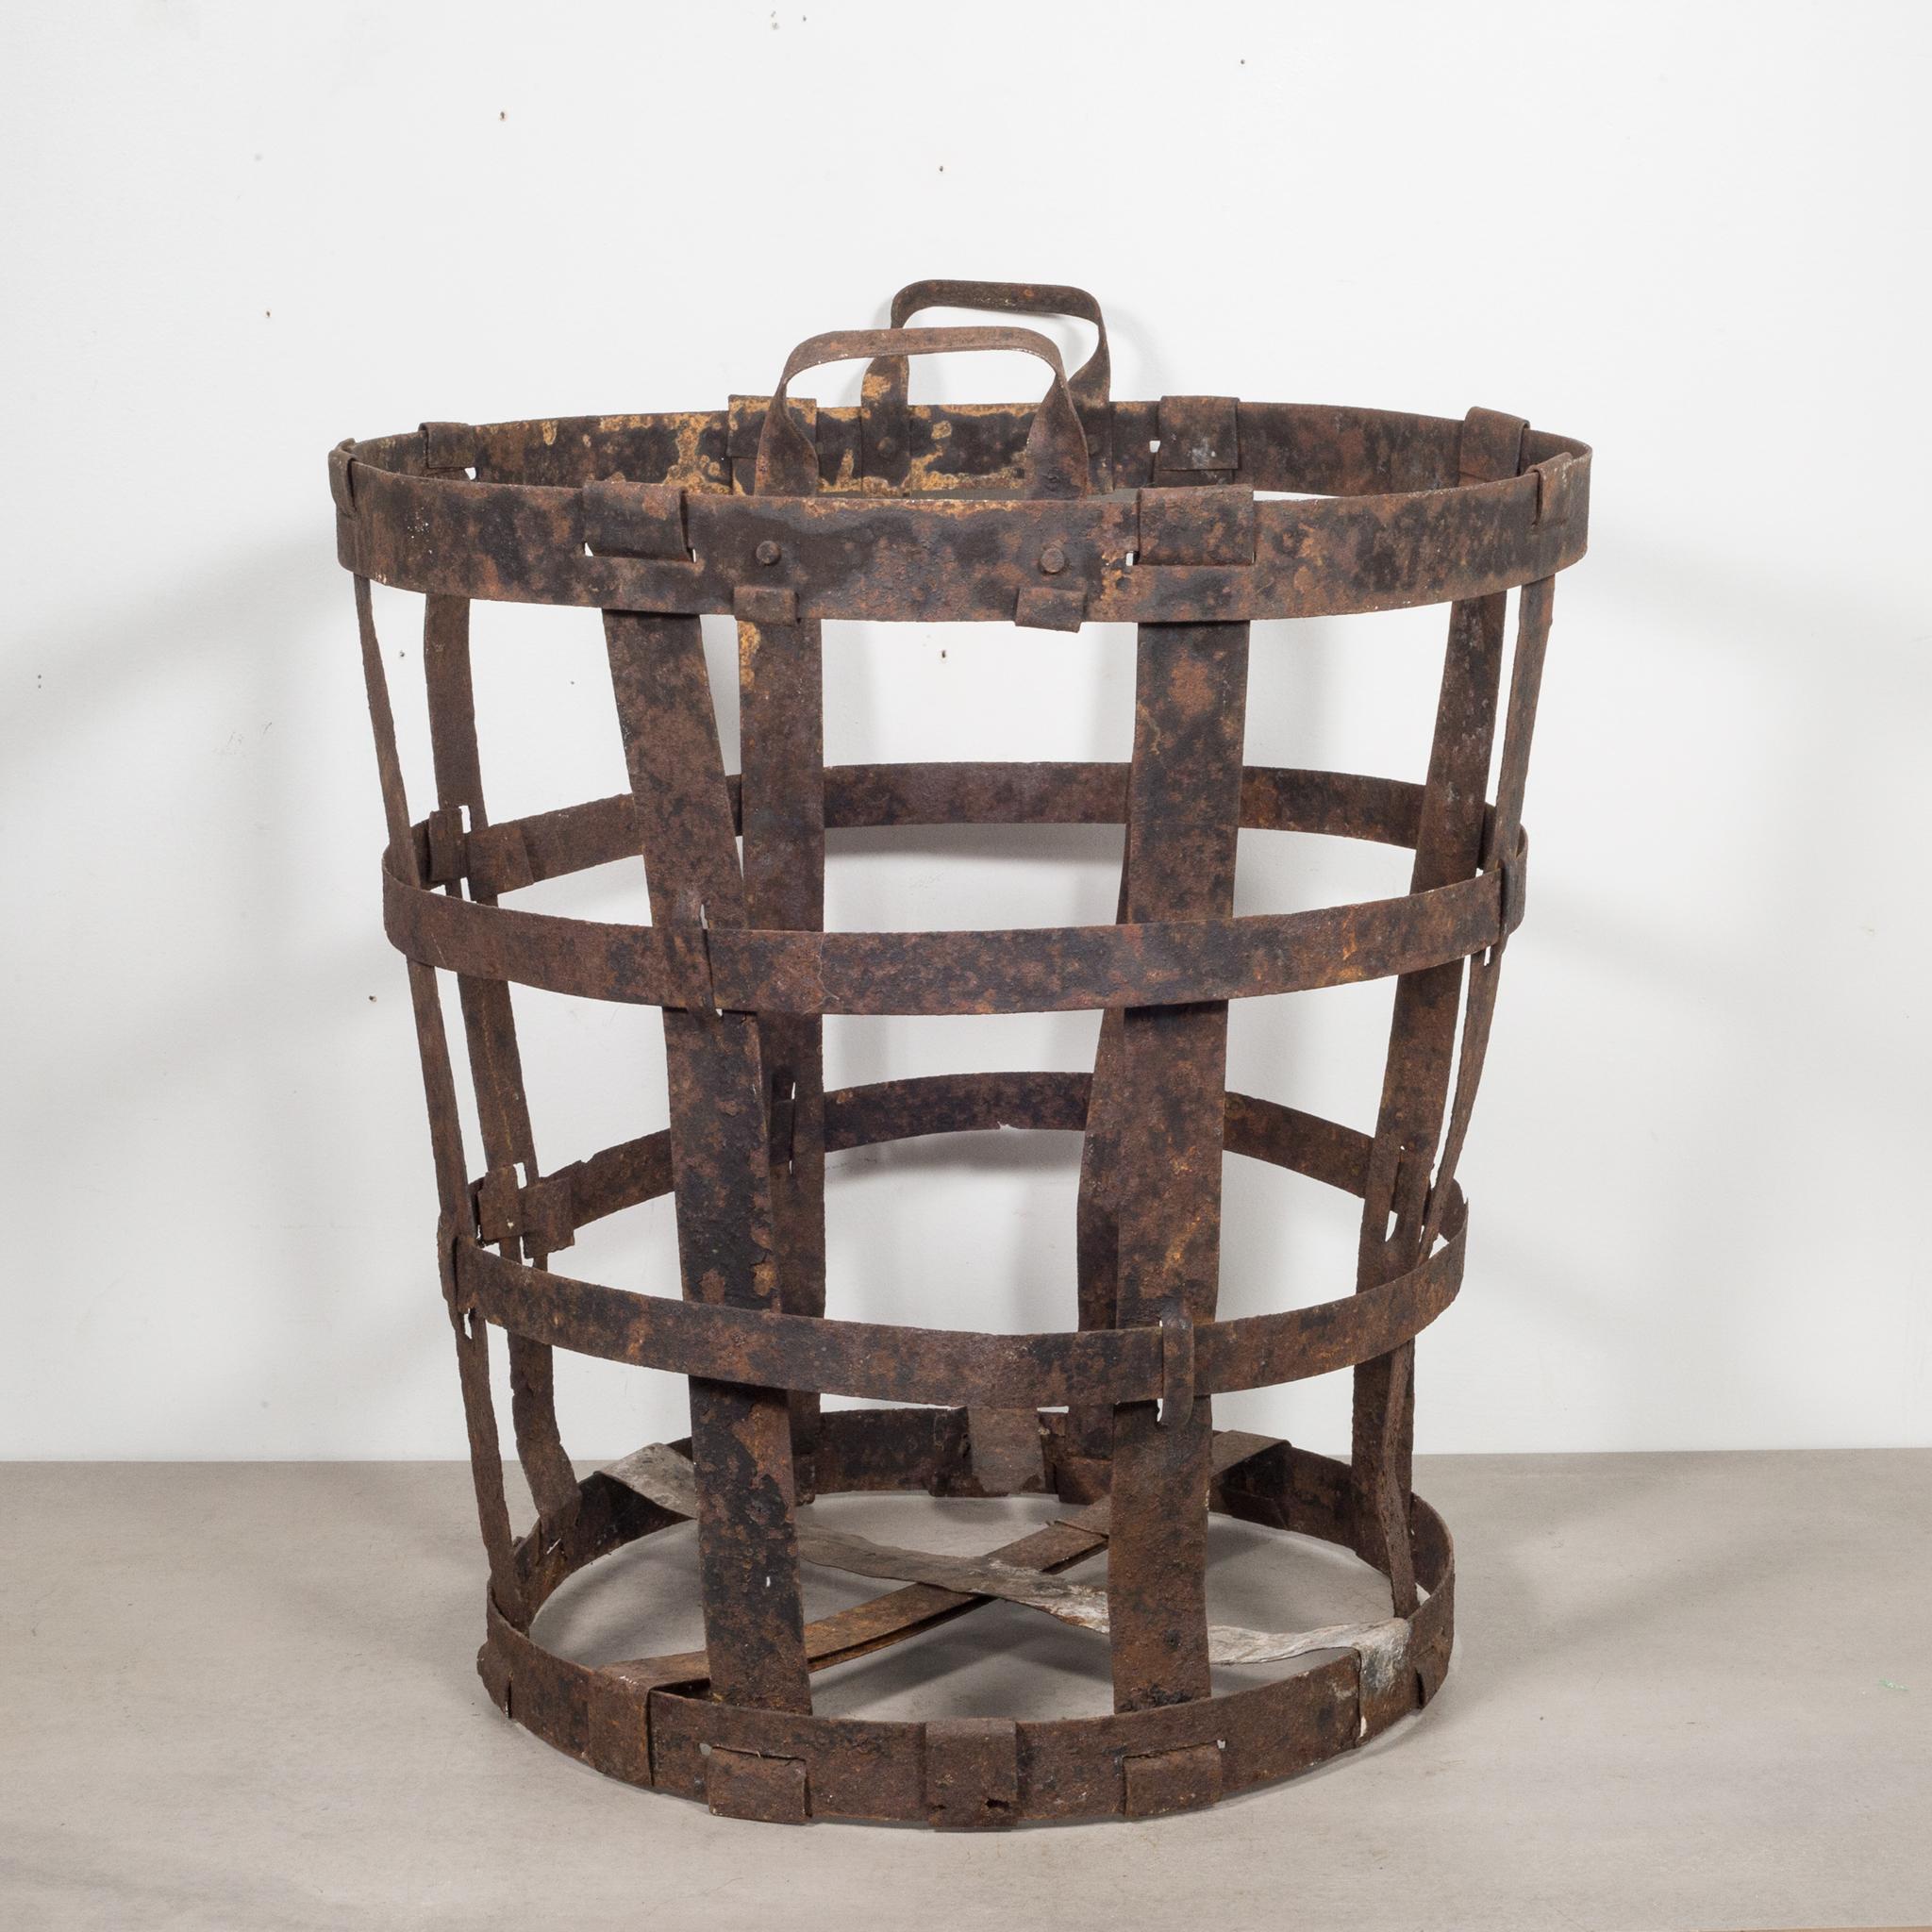 20th Century Antique Factory Steel Band Basket, c.1880-1920 For Sale